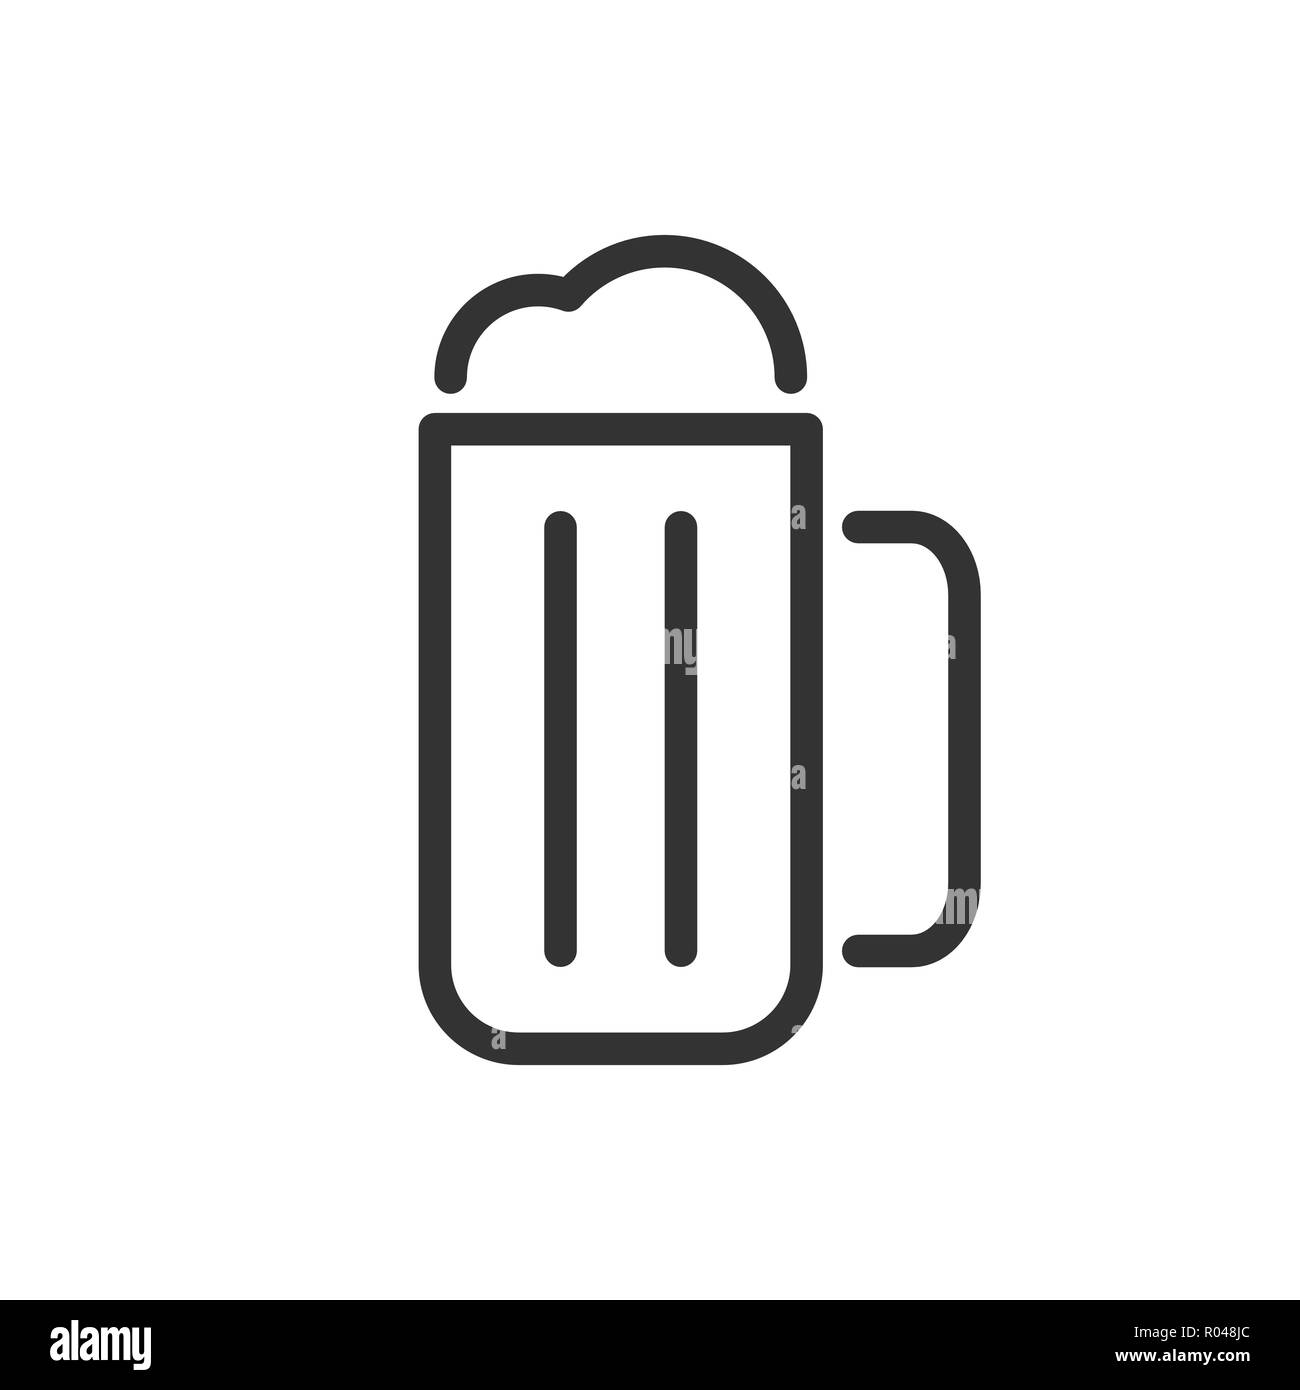 Beer icon Isolated on white background. Mug of beer sign, logo, pictogram for mobile app and web design. Simple linear style vector. Pixel graphics. Stock Vector